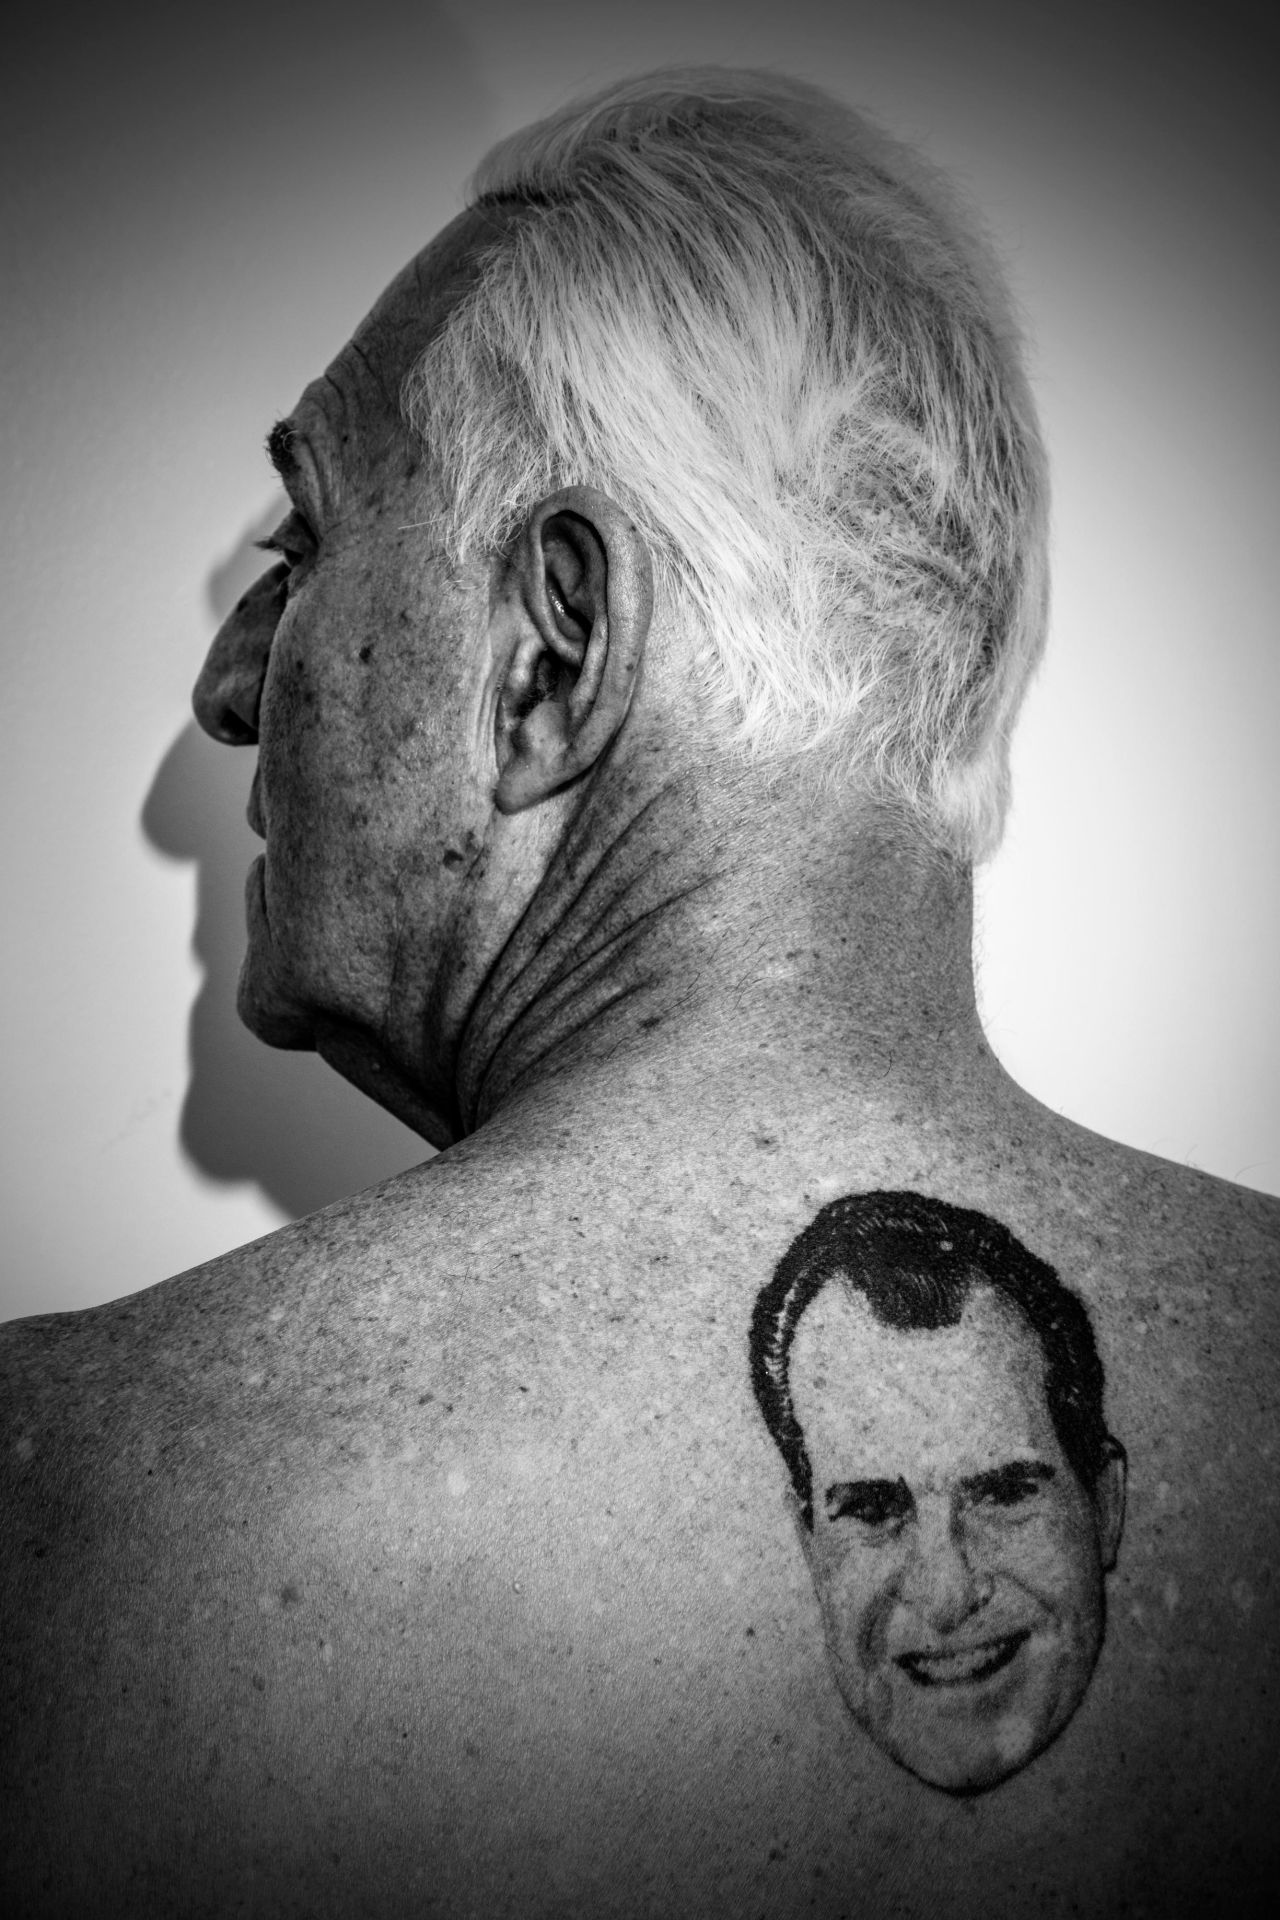 Stone shows a tattoo on his back of former President Nixon.